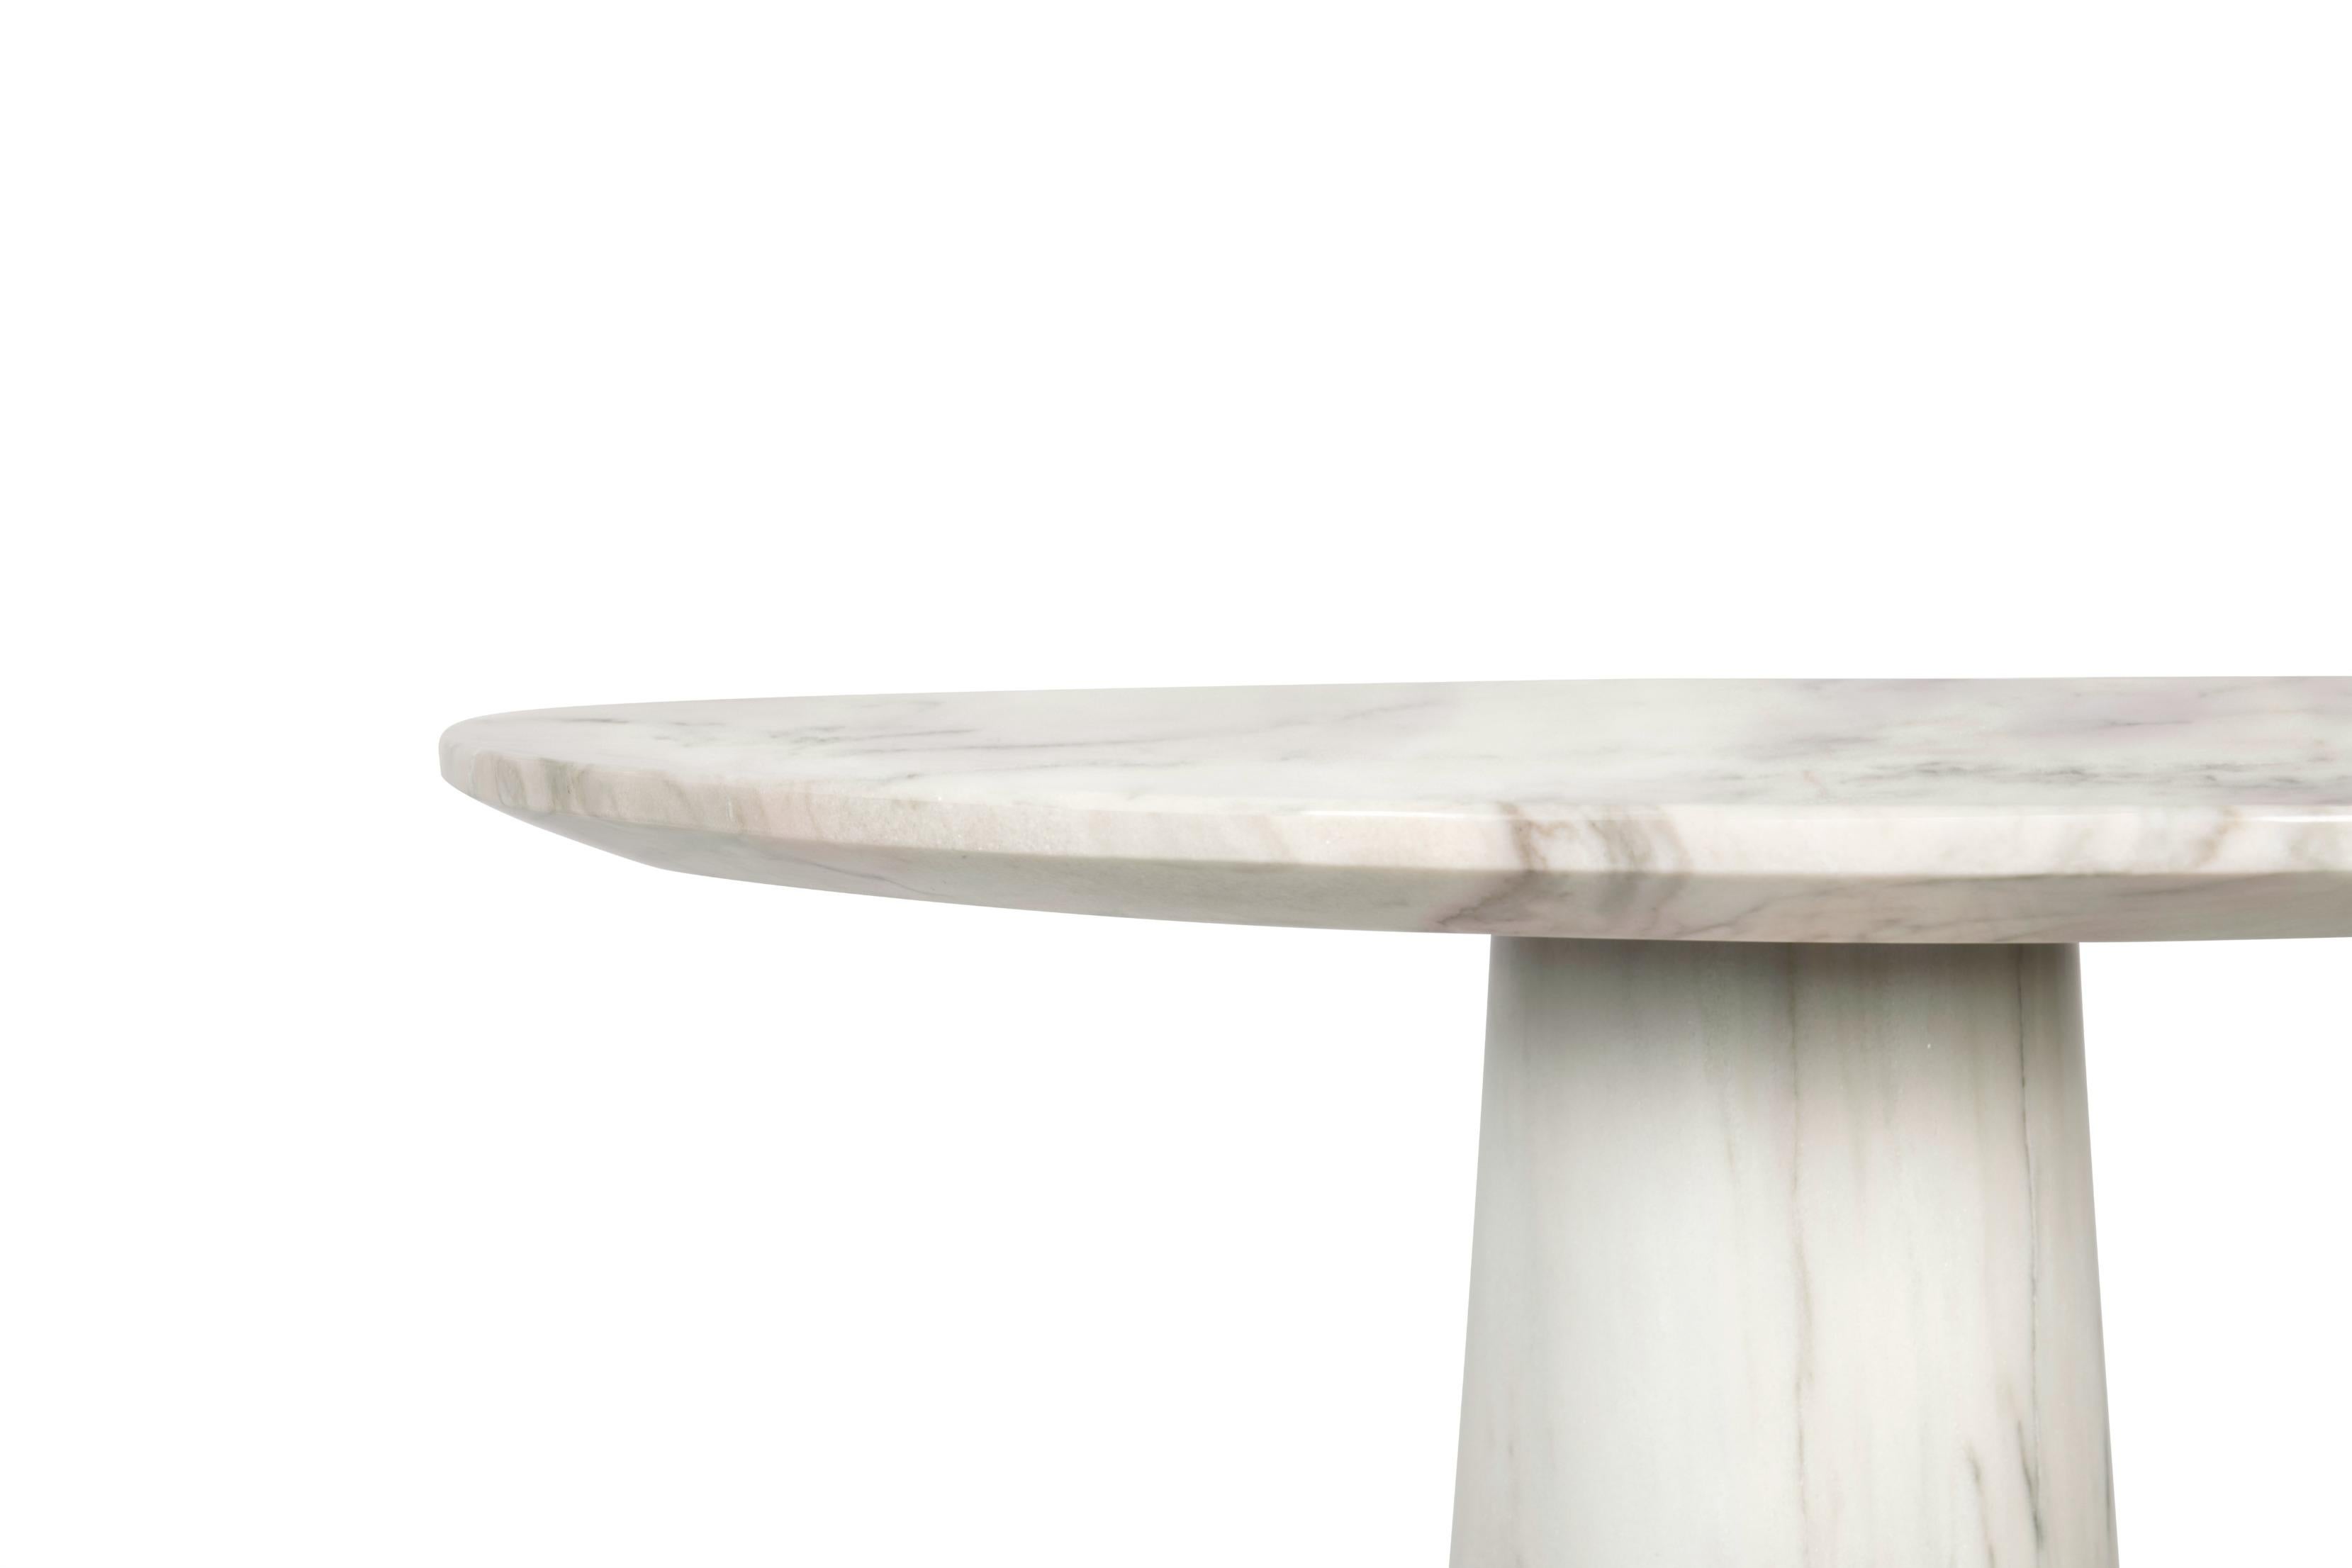 Agra is the modest setting of one of the most famous monuments in the world, Taj Mahal, also known as the marble mausoleum. Just like it, AGRA Bar Table is an impressive display of craftsmanship and elegance. Made of Estremoz marble with polished